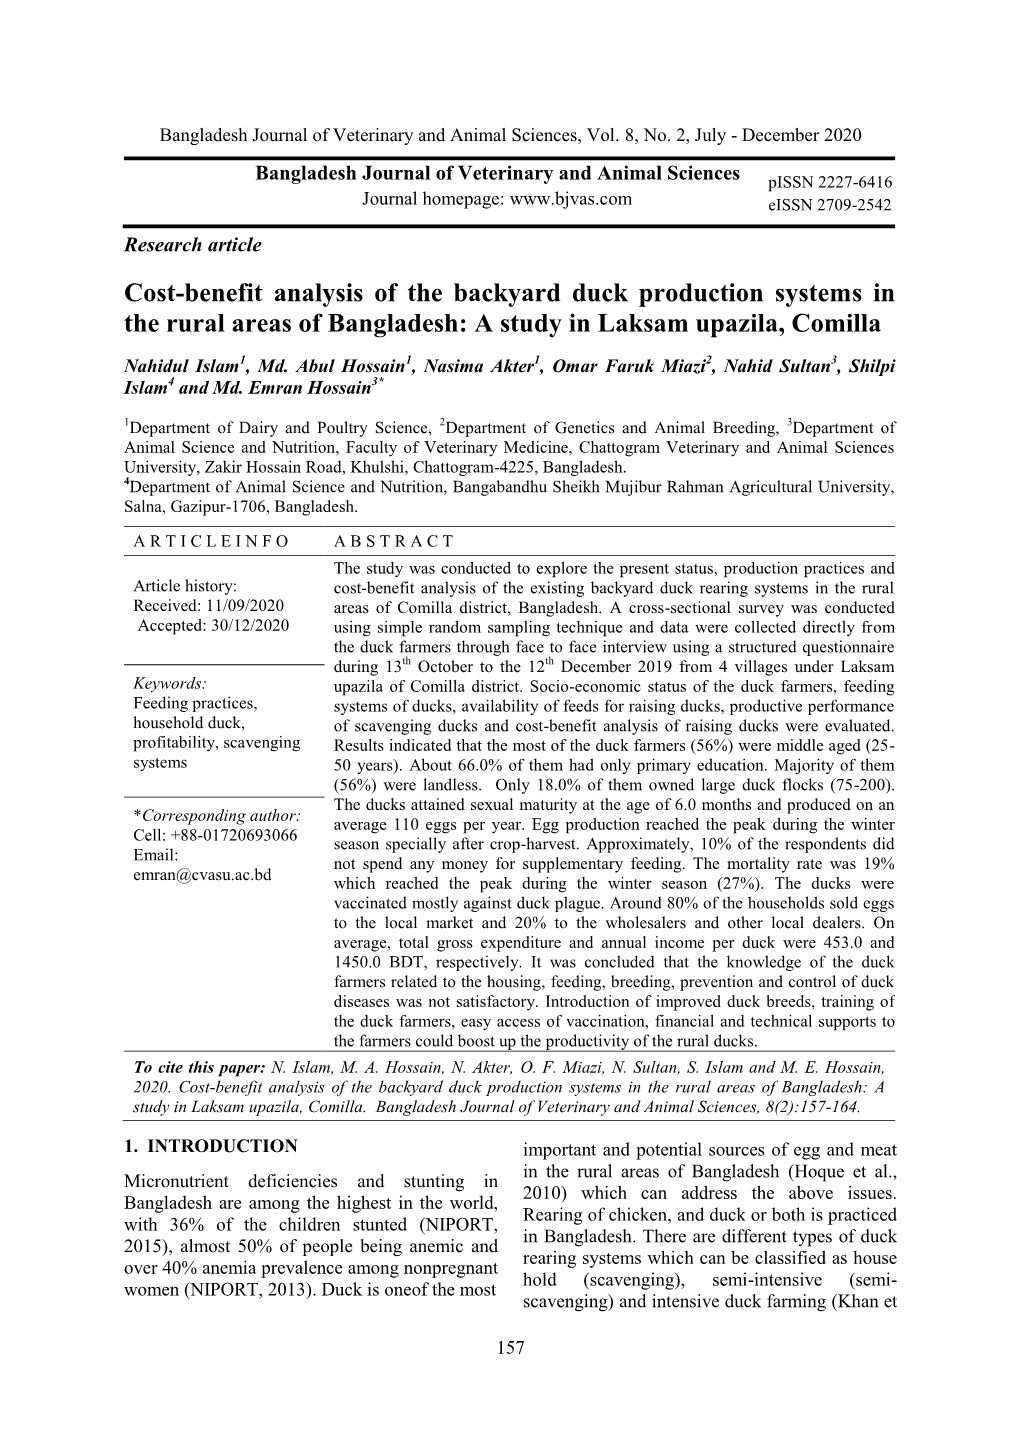 Cost-Benefit Analysis of the Backyard Duck Production Systems in the Rural Areas of Bangladesh: a Study in Laksam Upazila, Comilla